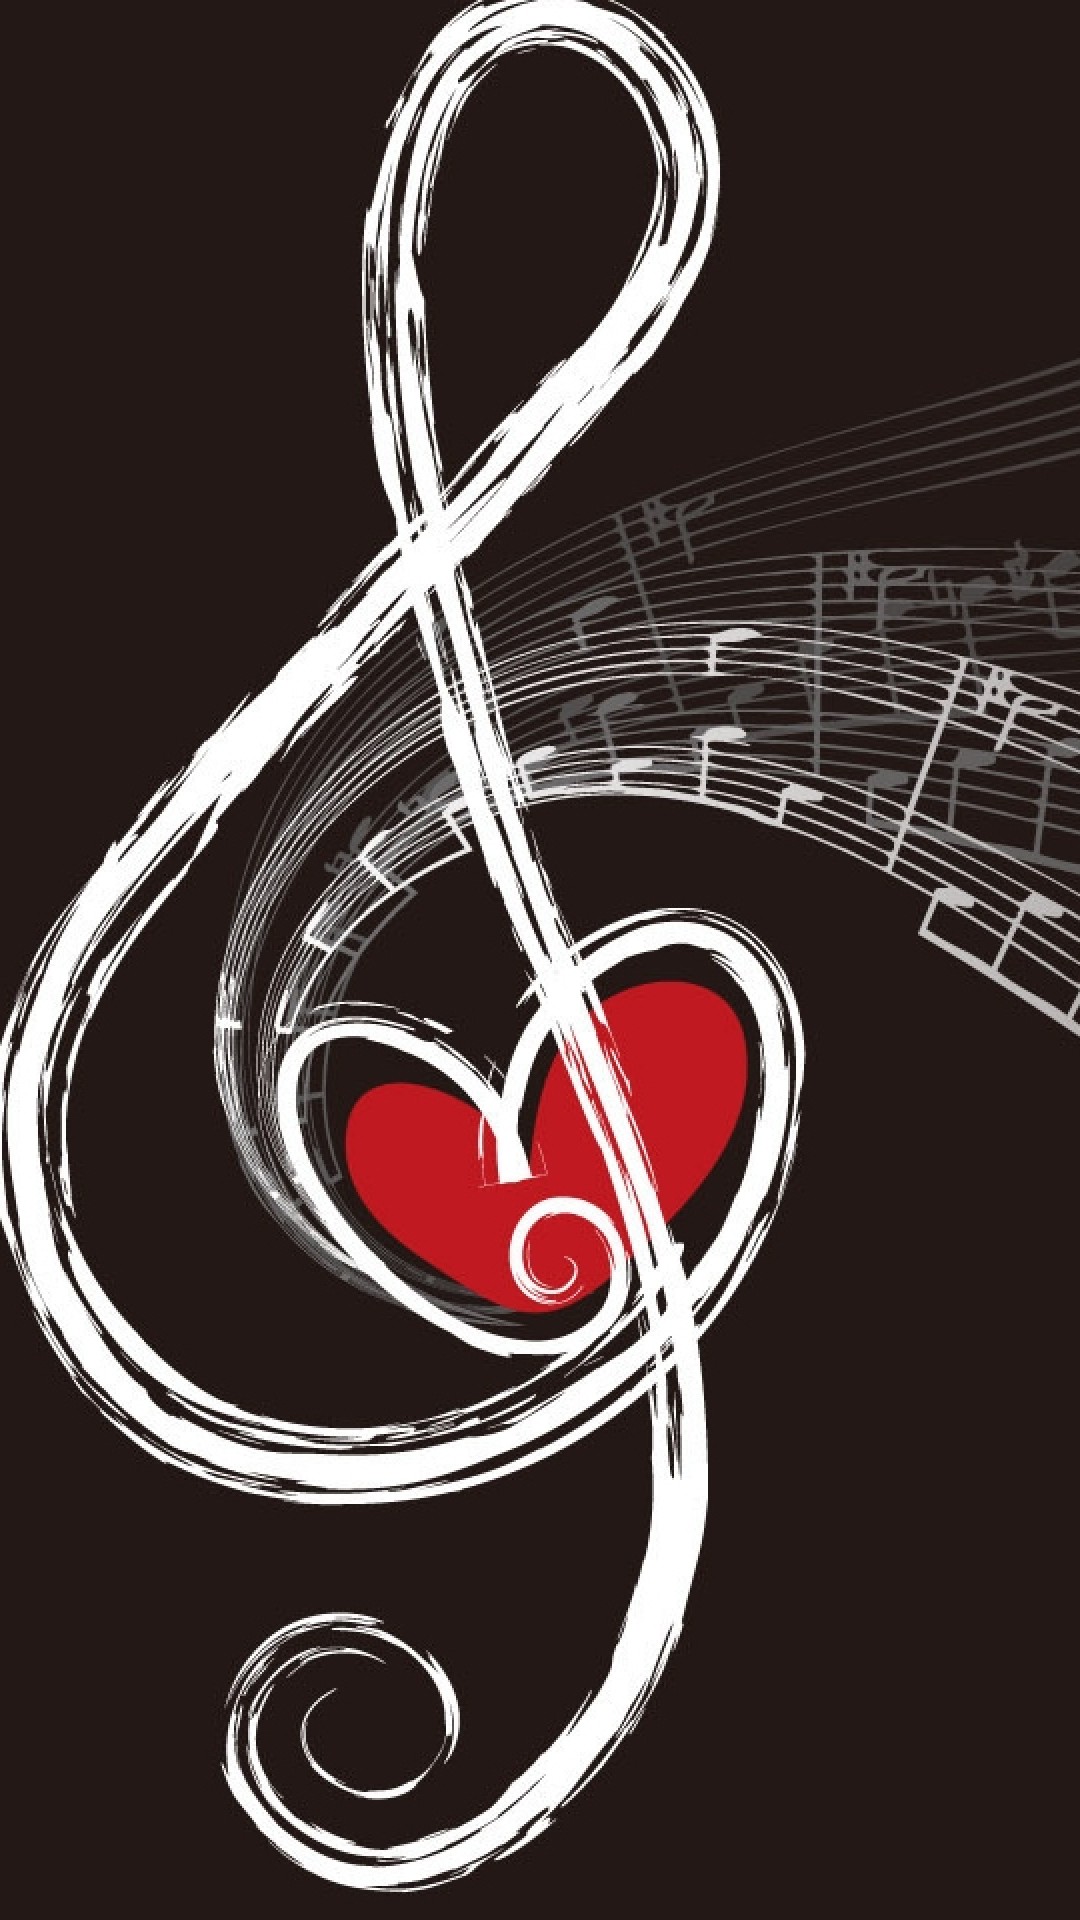 hd music wallpapers for android,text,font,heart,graphic design,love